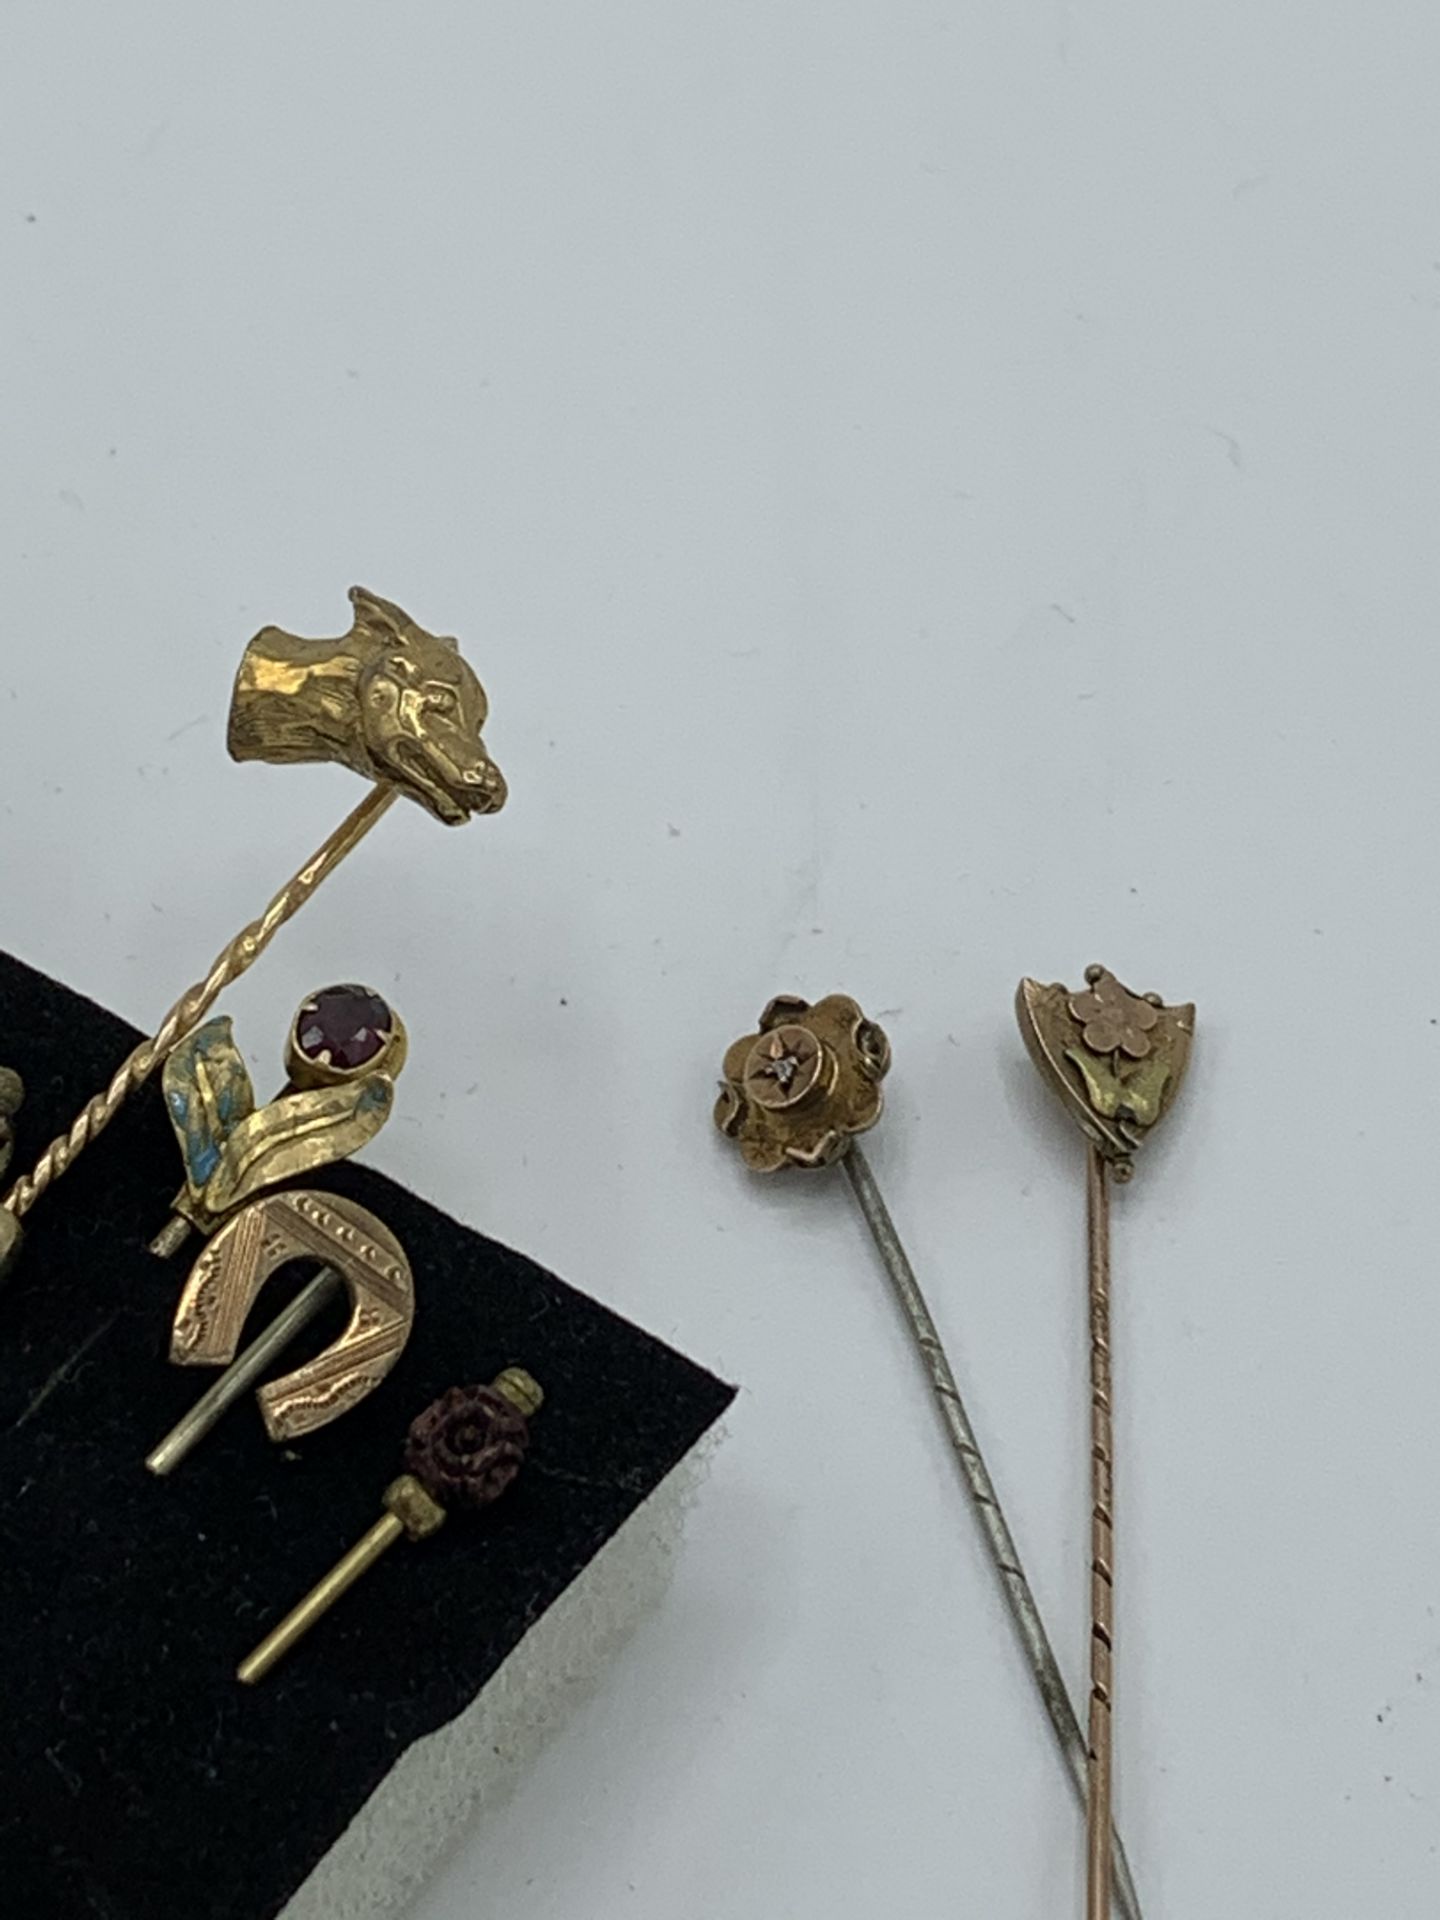 2 x 9ct gold stick pins and 9 others. Estimate £20-30. - Image 3 of 3